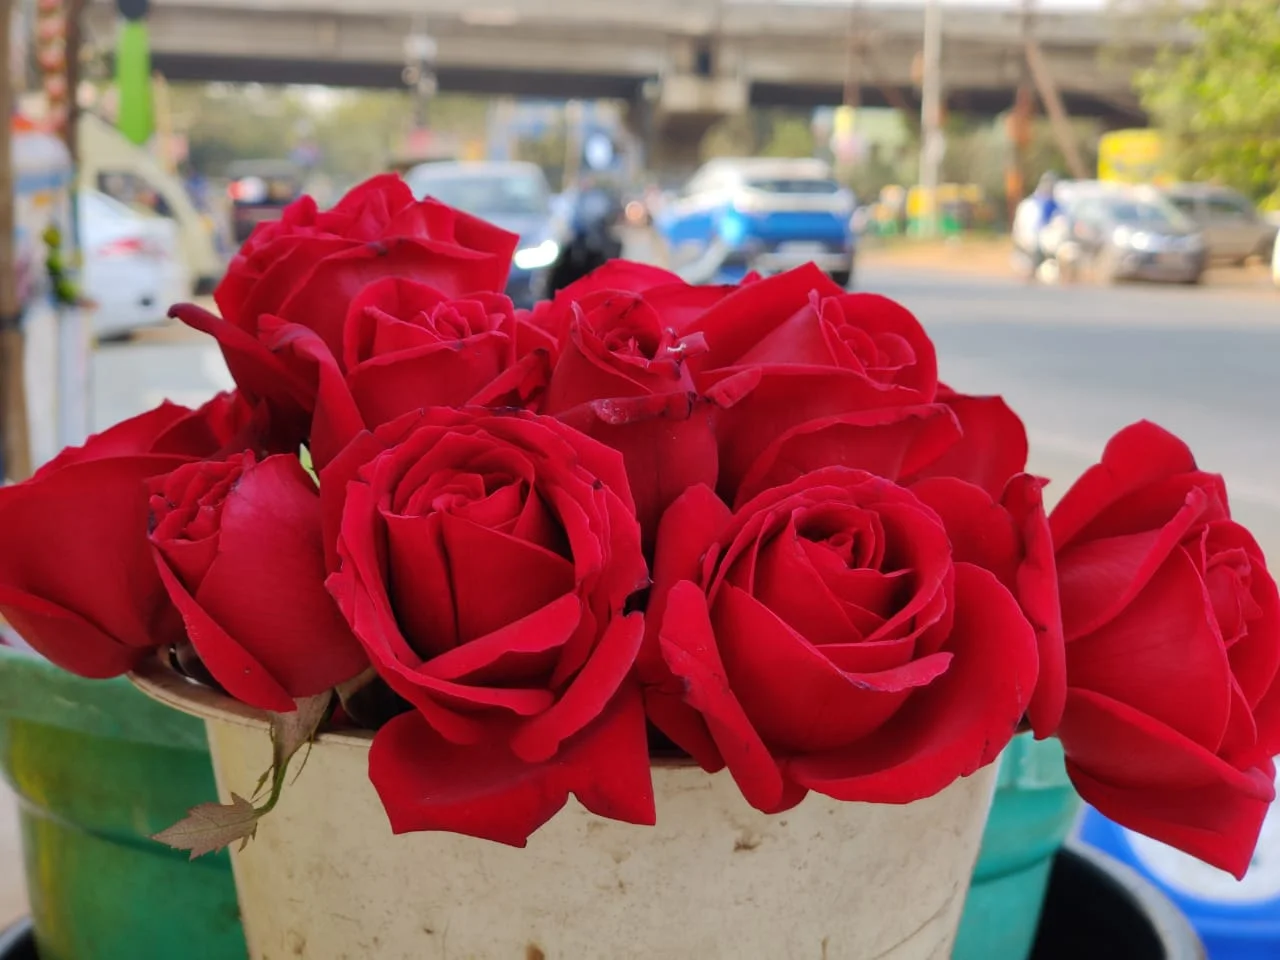 Love In Air As Valentine Week Starts With Rose Day Today - odishabytes